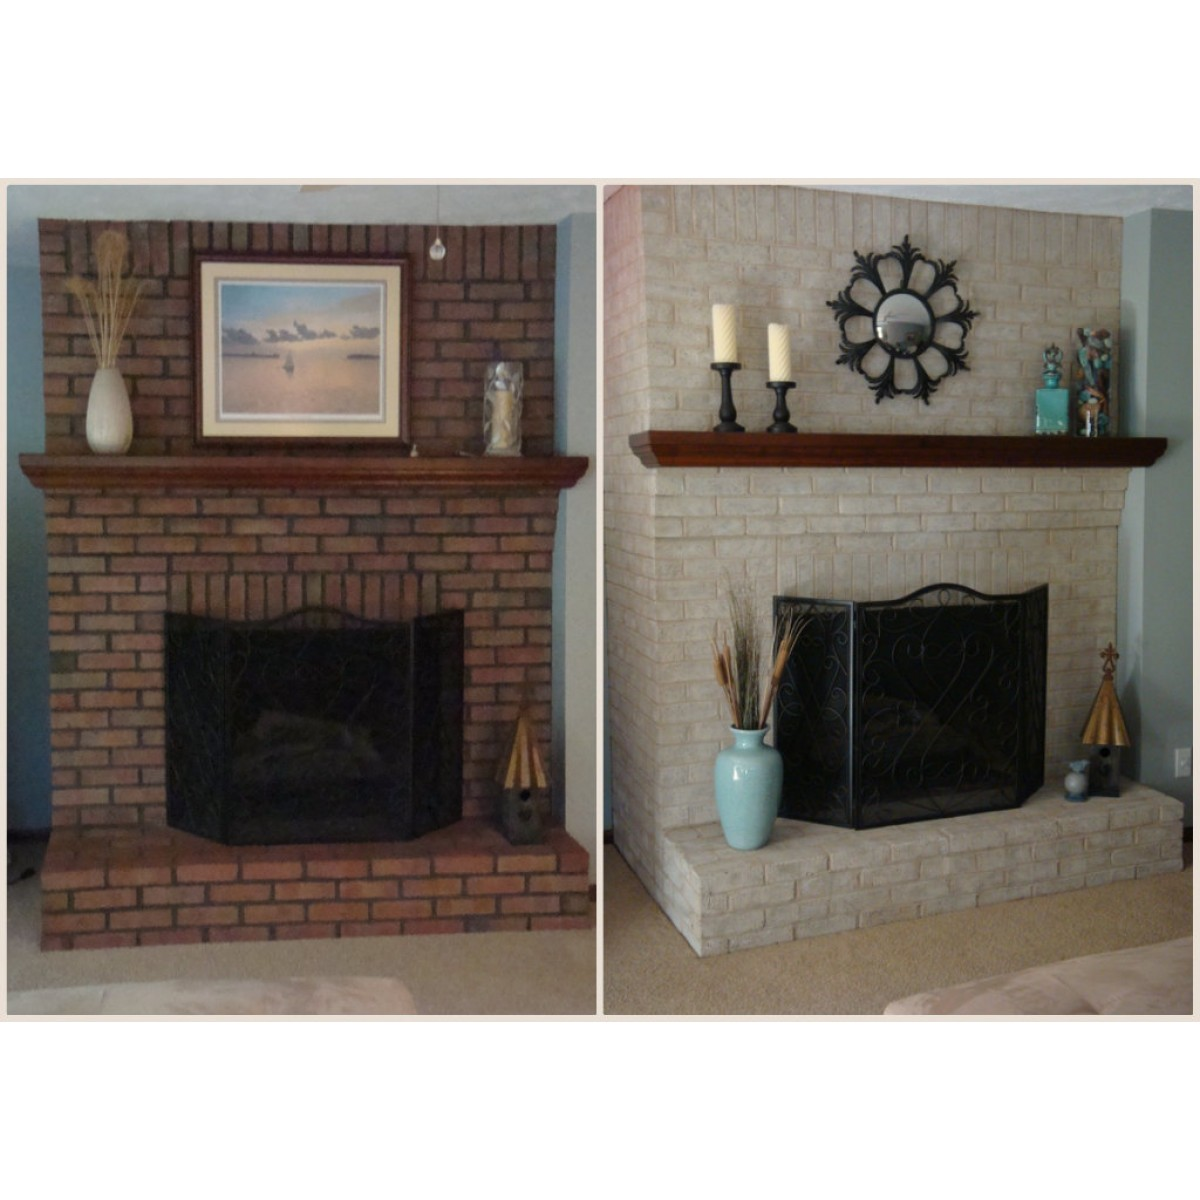 How To Paint A Red Brick Fireplace To Look Like Stone